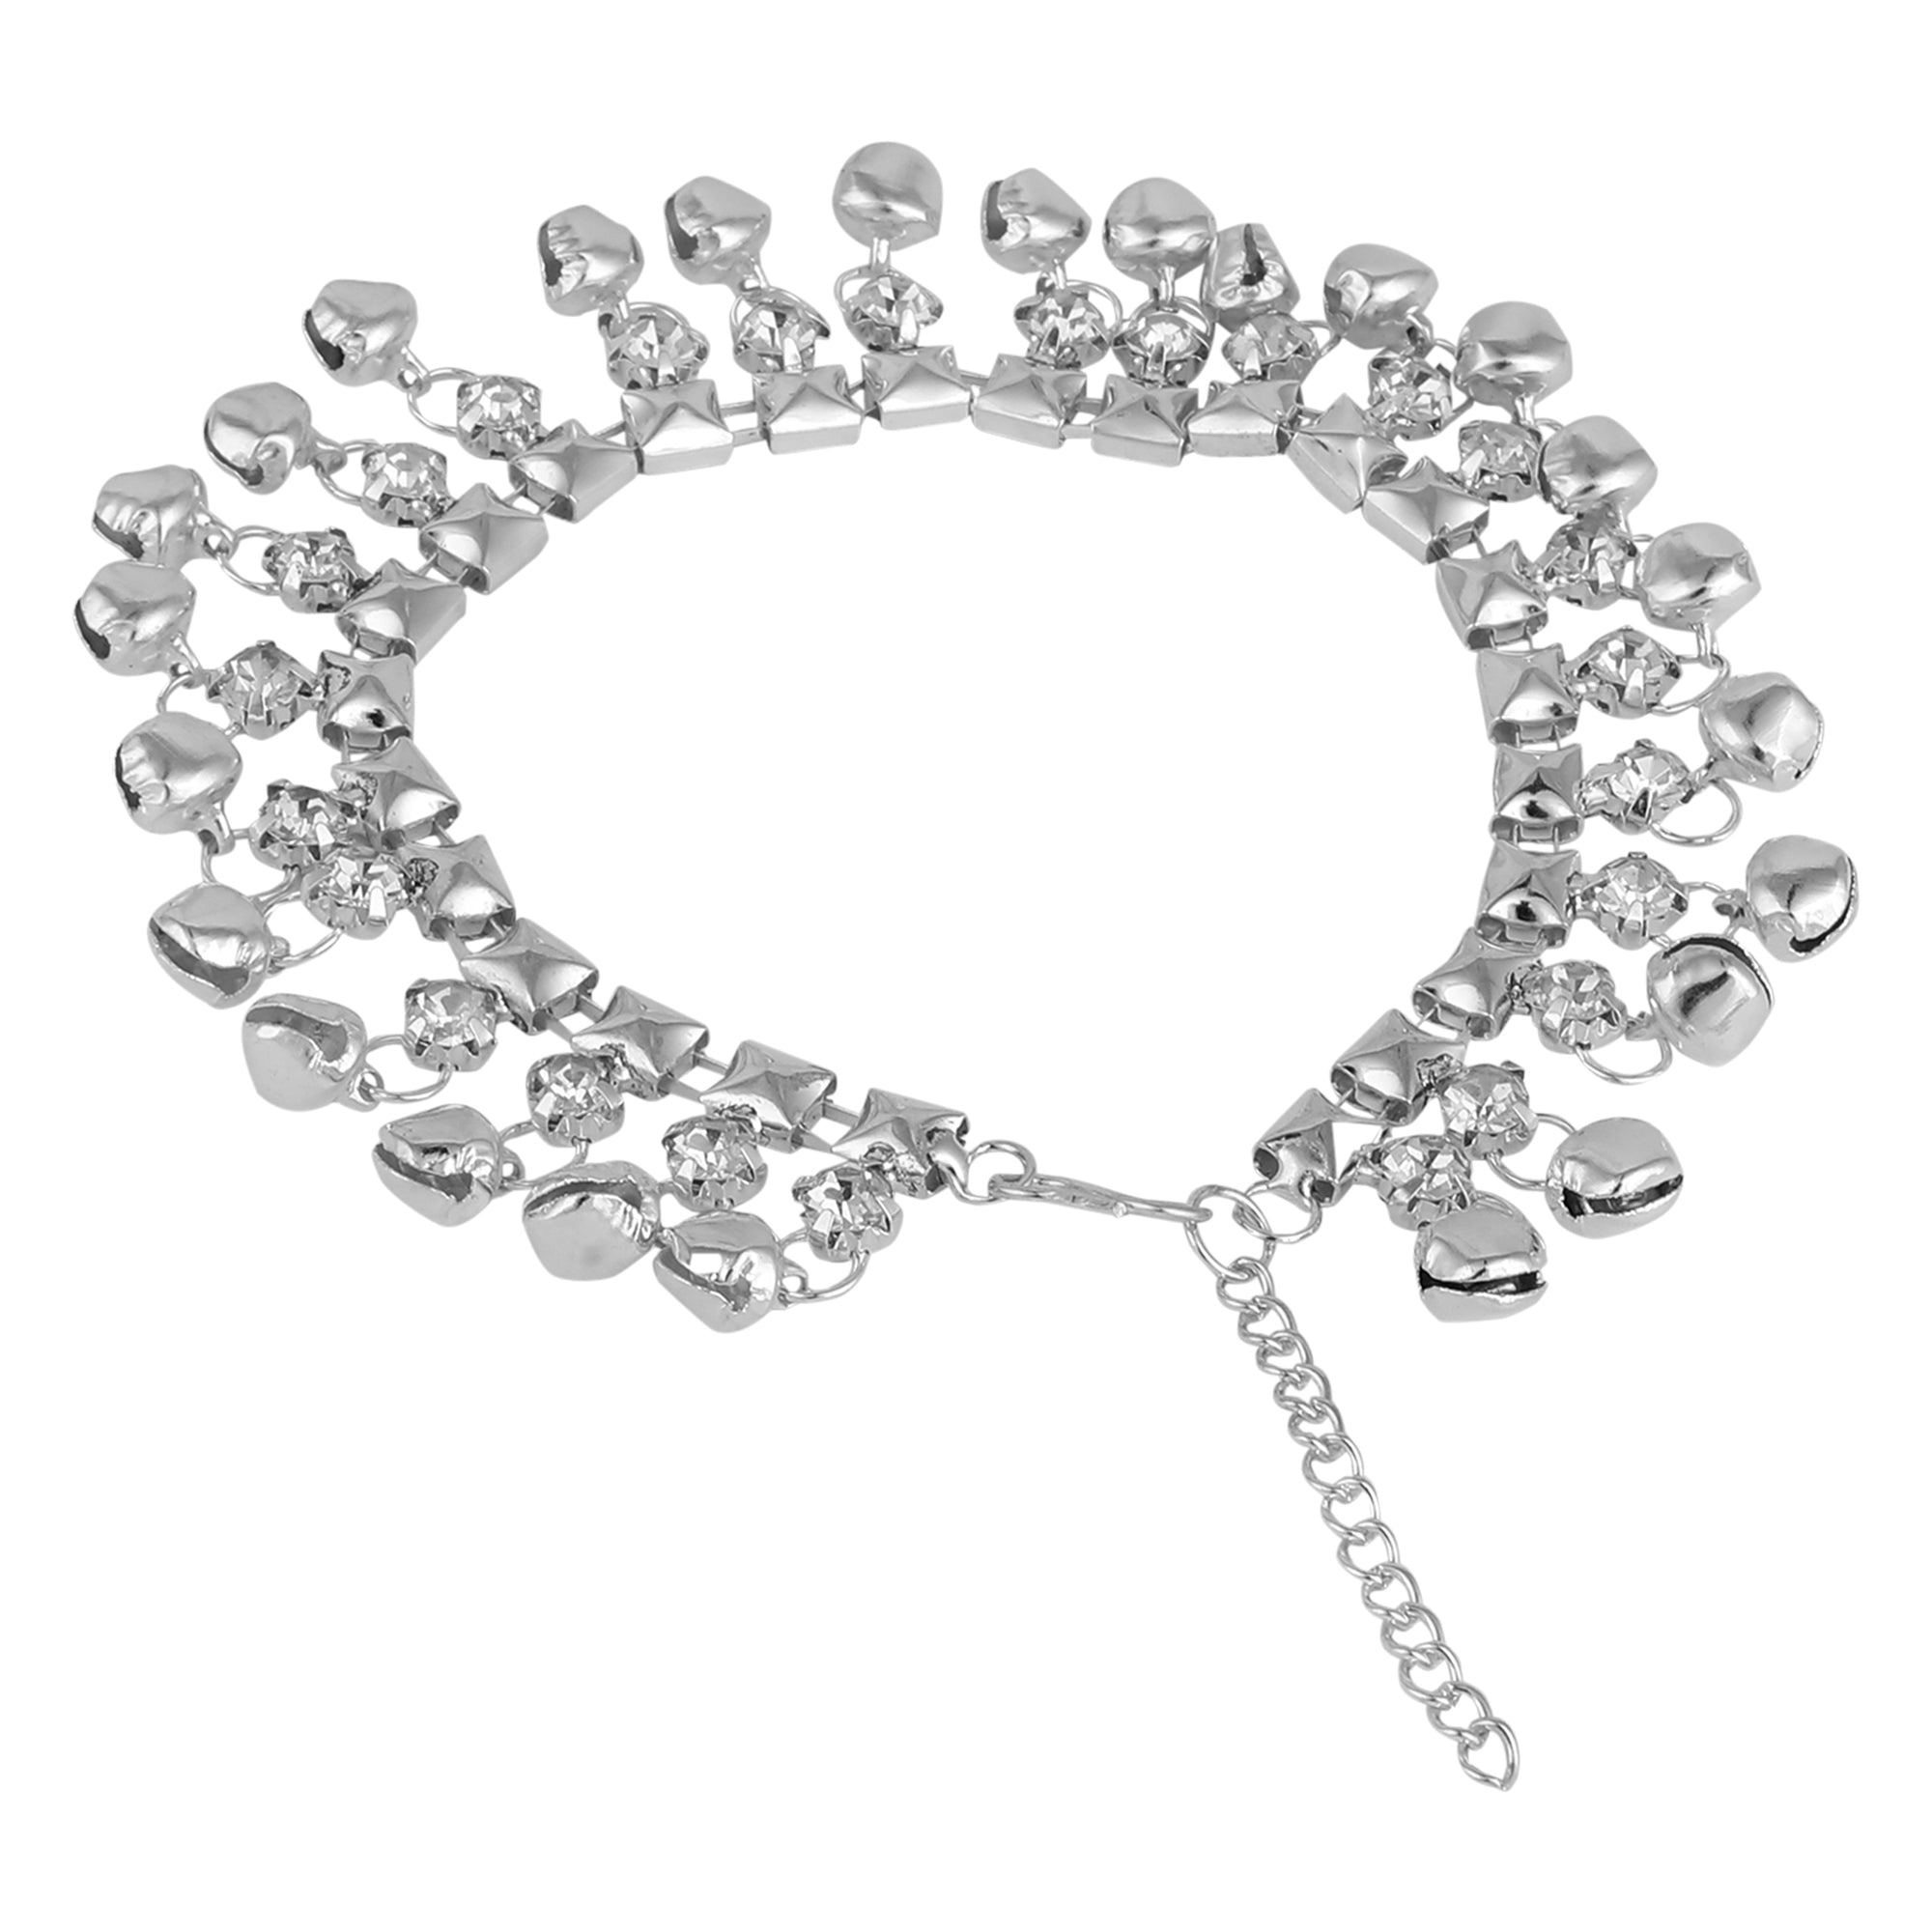 Women's Metallic Silver Ghungru Studded Statement Anklets - MODE MANIA